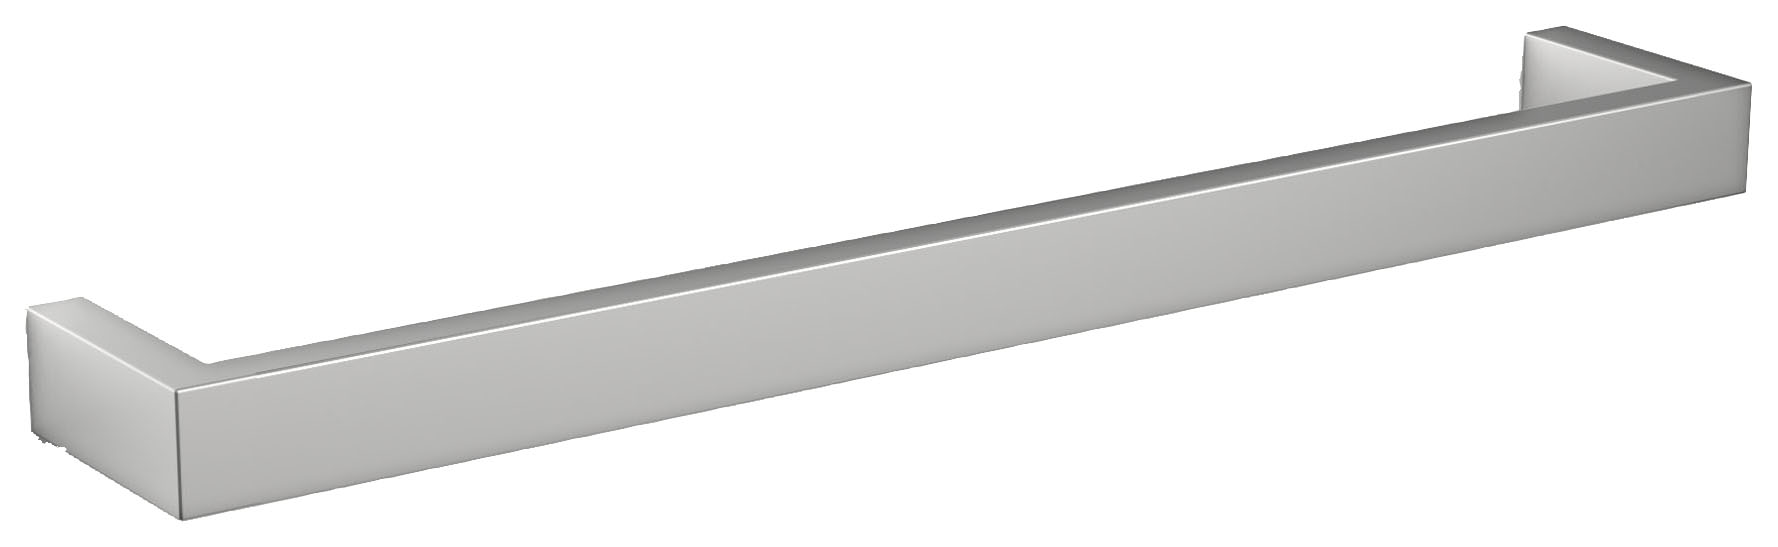 Towelrads Elcot Brushed Stainless Dry Electric Towel Bar - 450mm